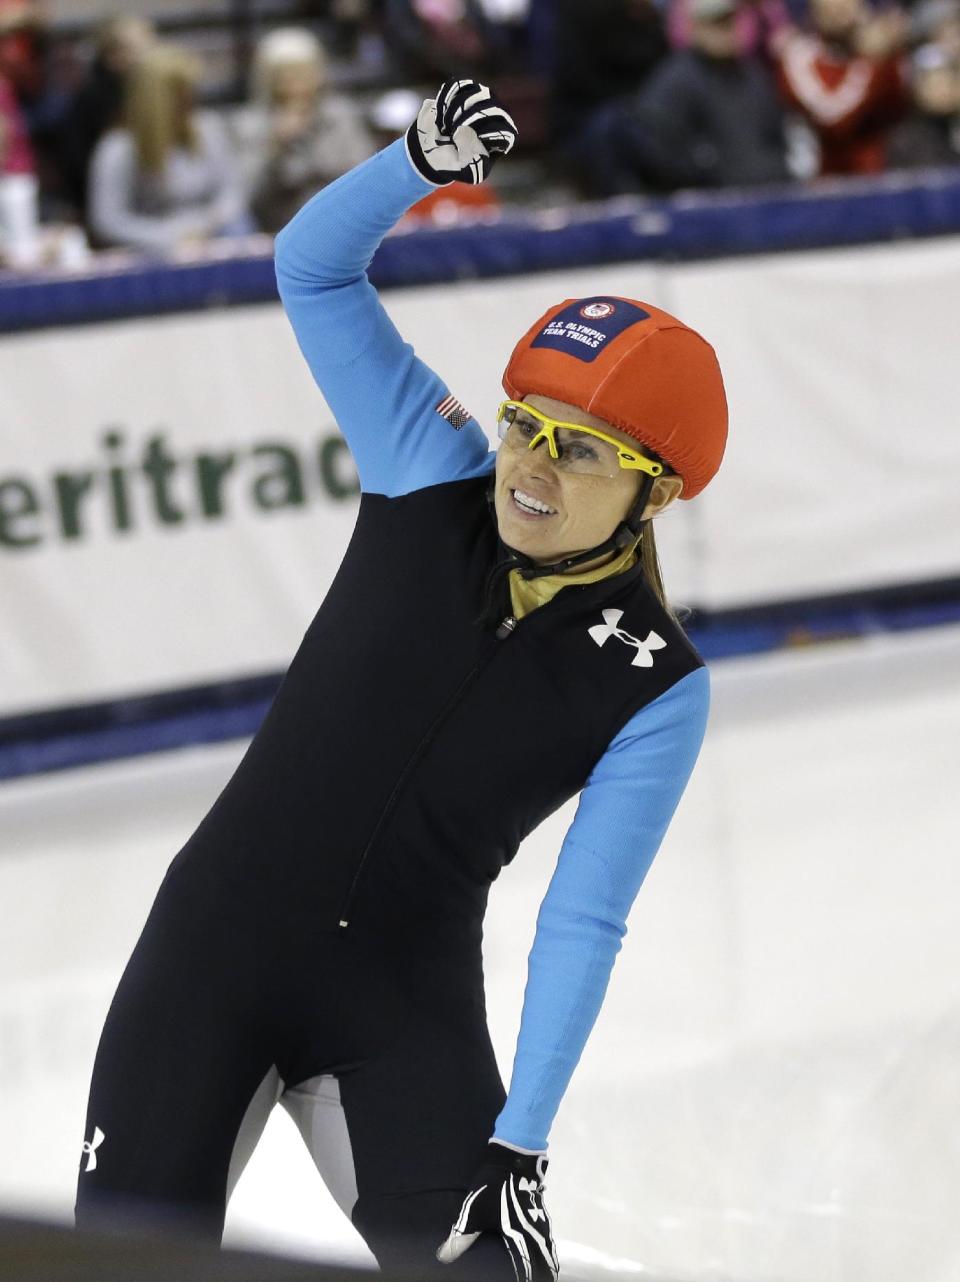 First-place finisher Jessica Smith reacts to the crowd after winning the women's 1,500 meters during the U.S. Olympic short track speedskating trials, Friday, Jan. 3, 2014, in Kearns, Utah. (AP Photo/Rick Bowmer)